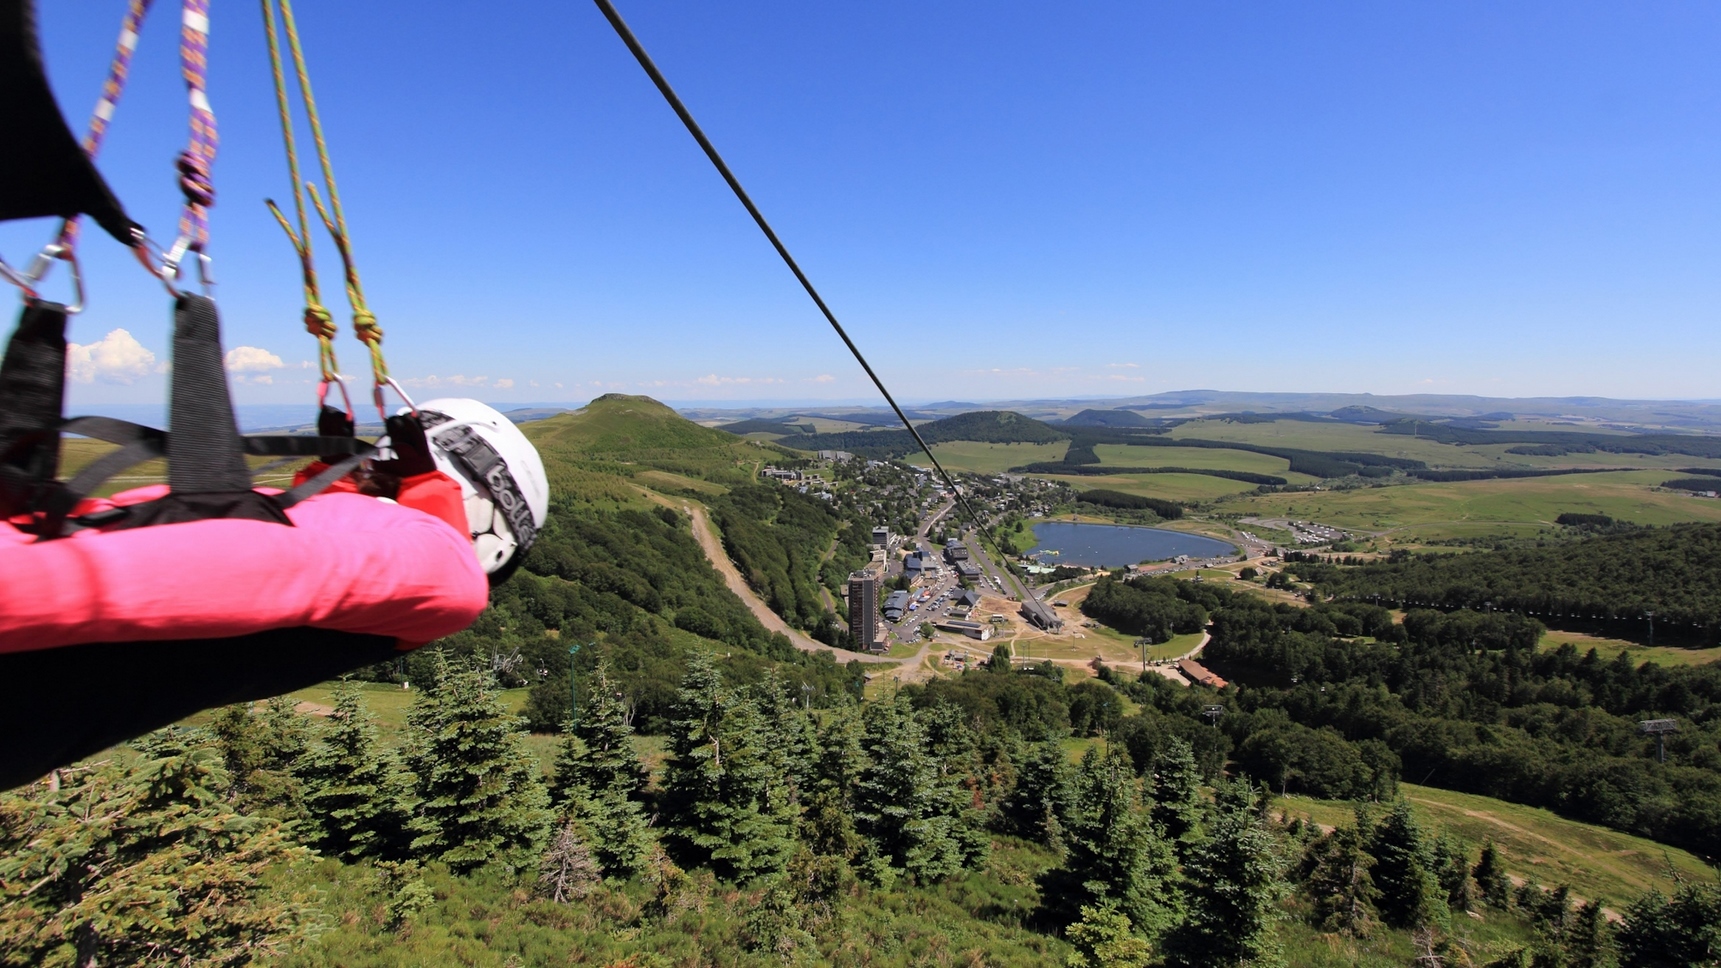 Zip line Super Besse: Superb view from the start of the zip line in Super Besse